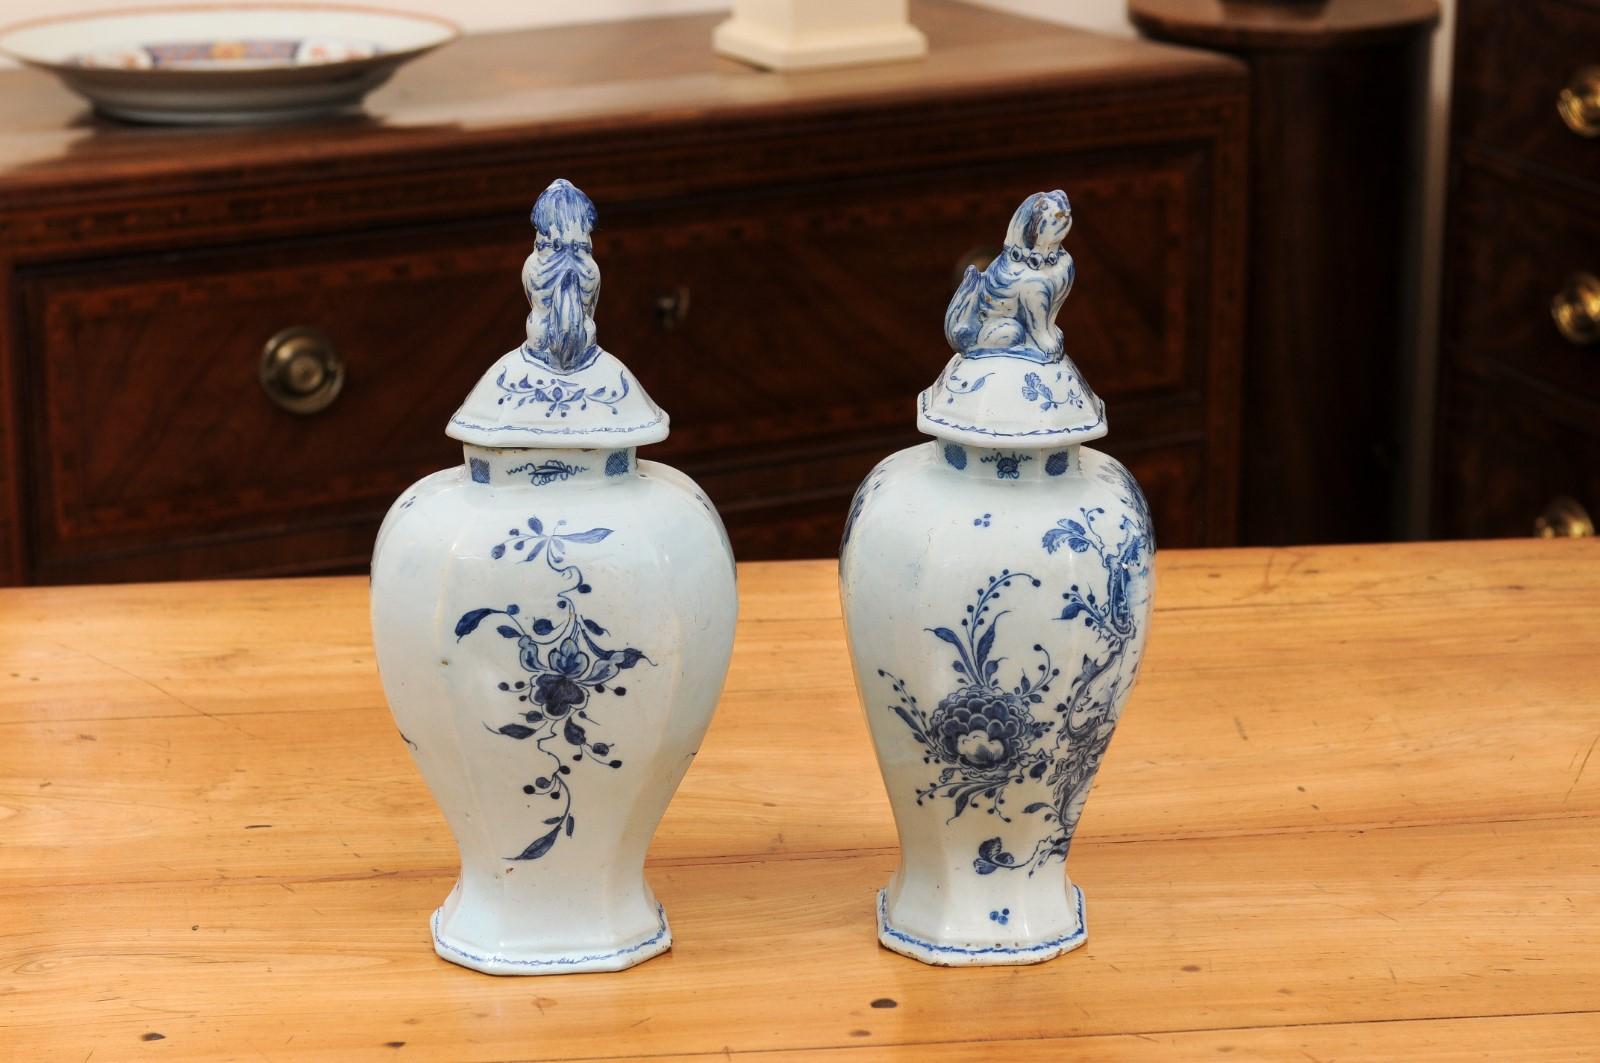 Pair of Late 18th Century Italian Porcelain Garniture Urns with Lids For Sale 7